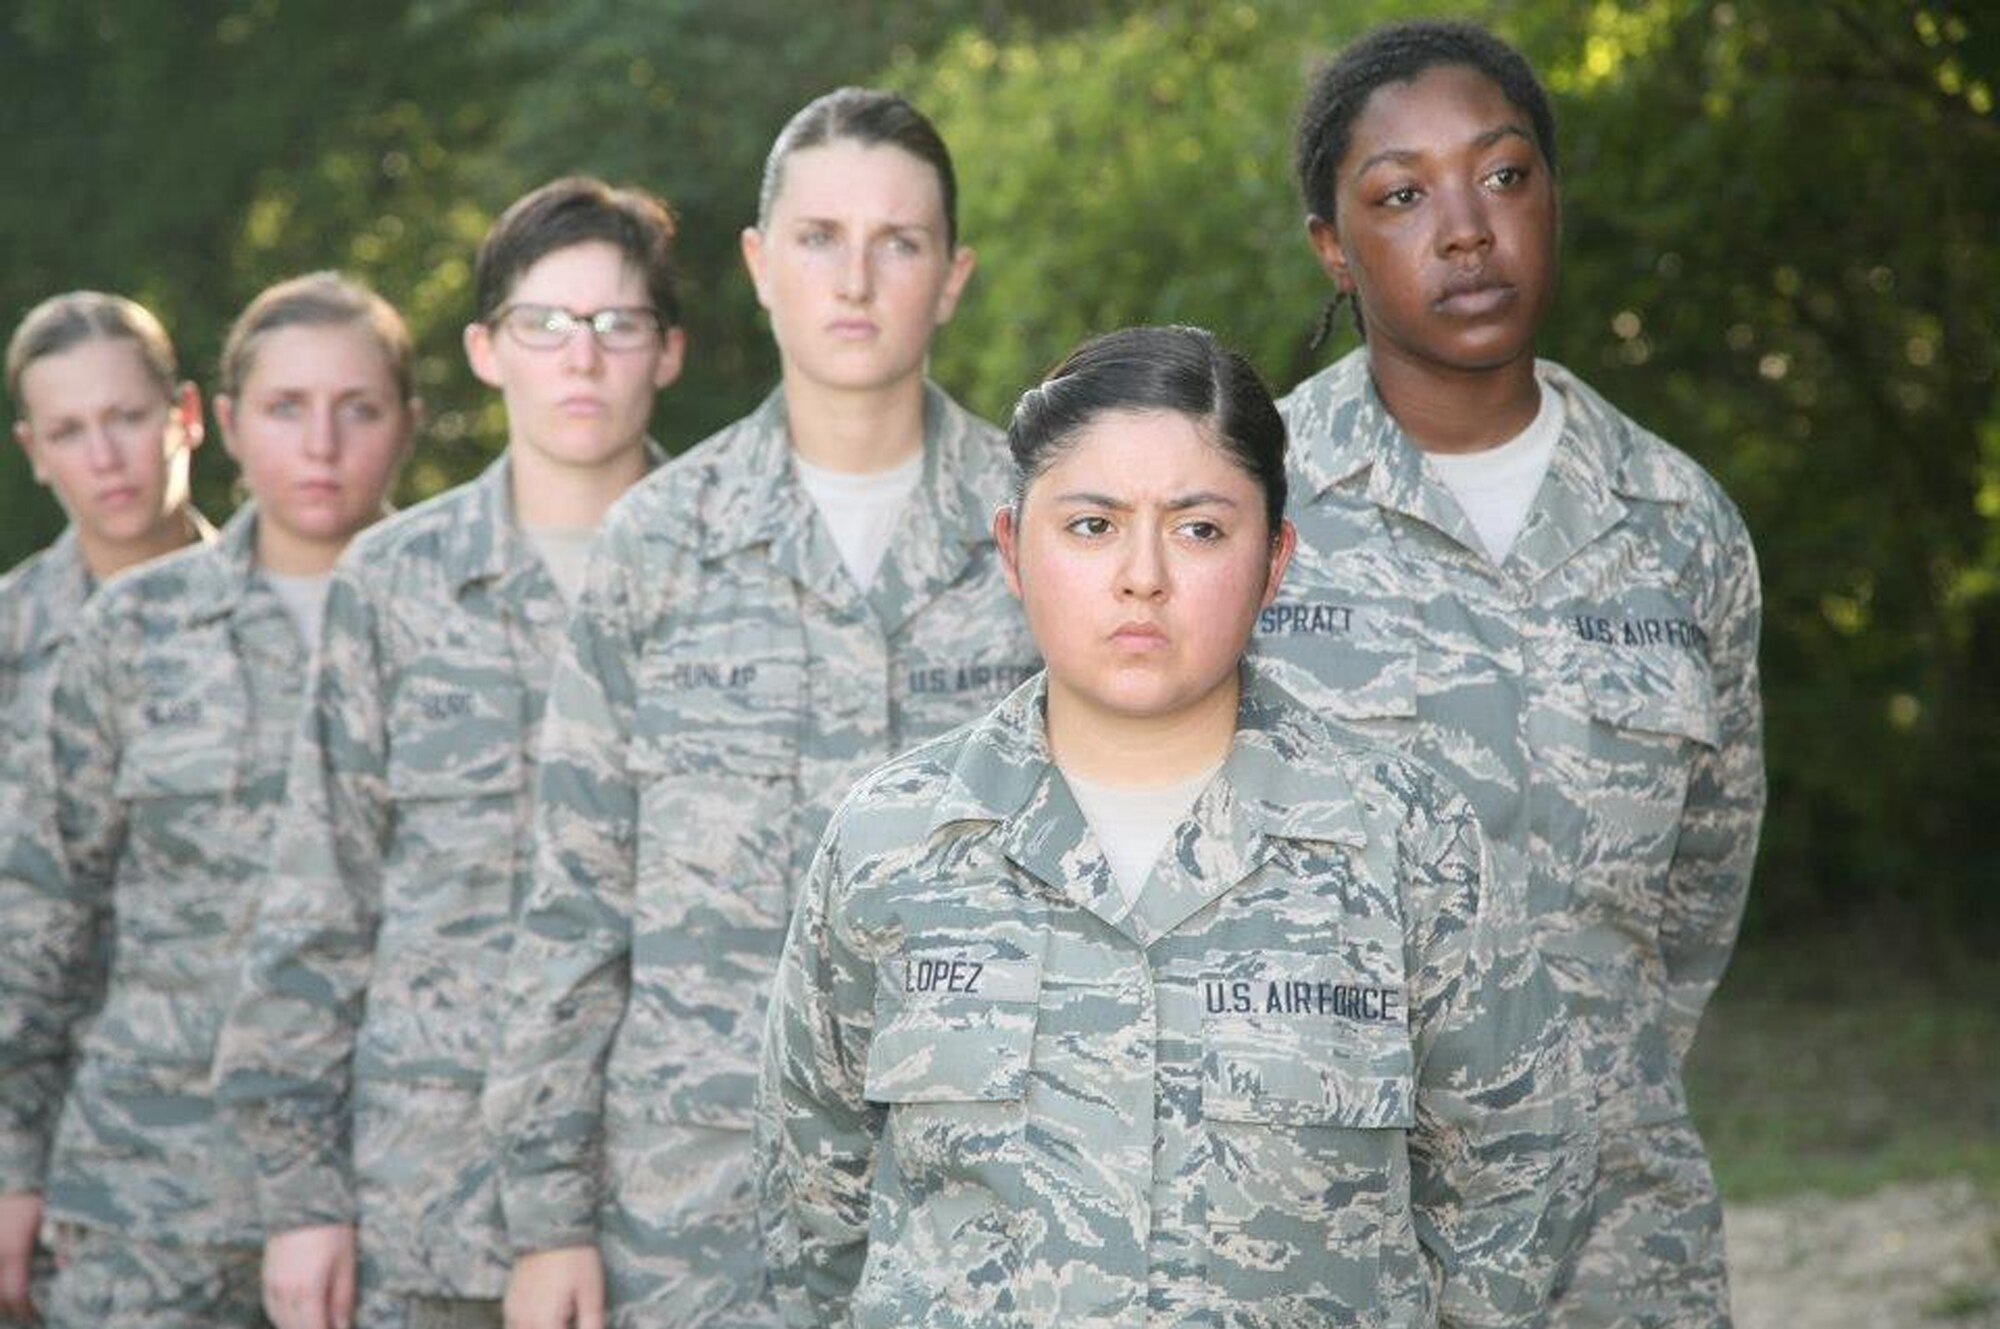 Photos appearing on the USAF BMT facebook page feature some 171st Air Refueling Wing recruits Alyssa Dunlap and Clarissa Fabus.